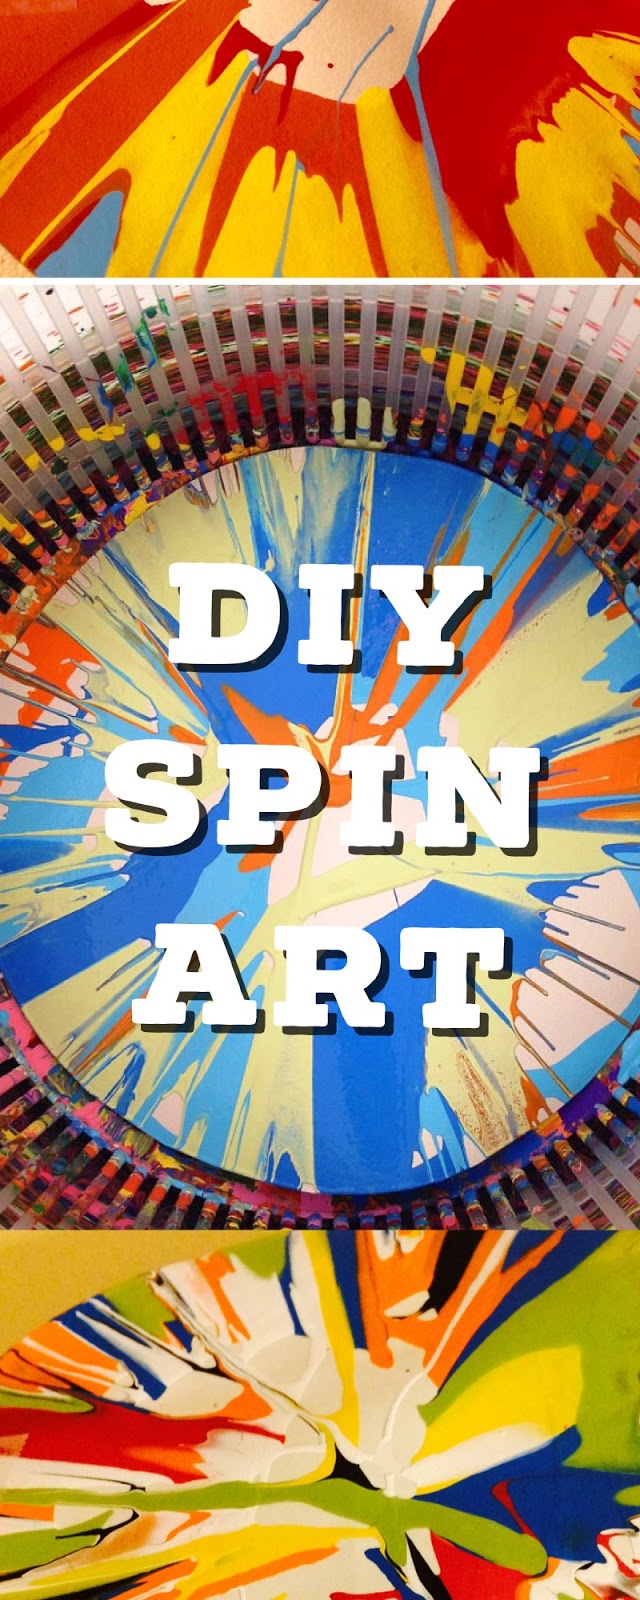 Homemade Spin Art Machine  Spin art, Spinning, Arts and crafts